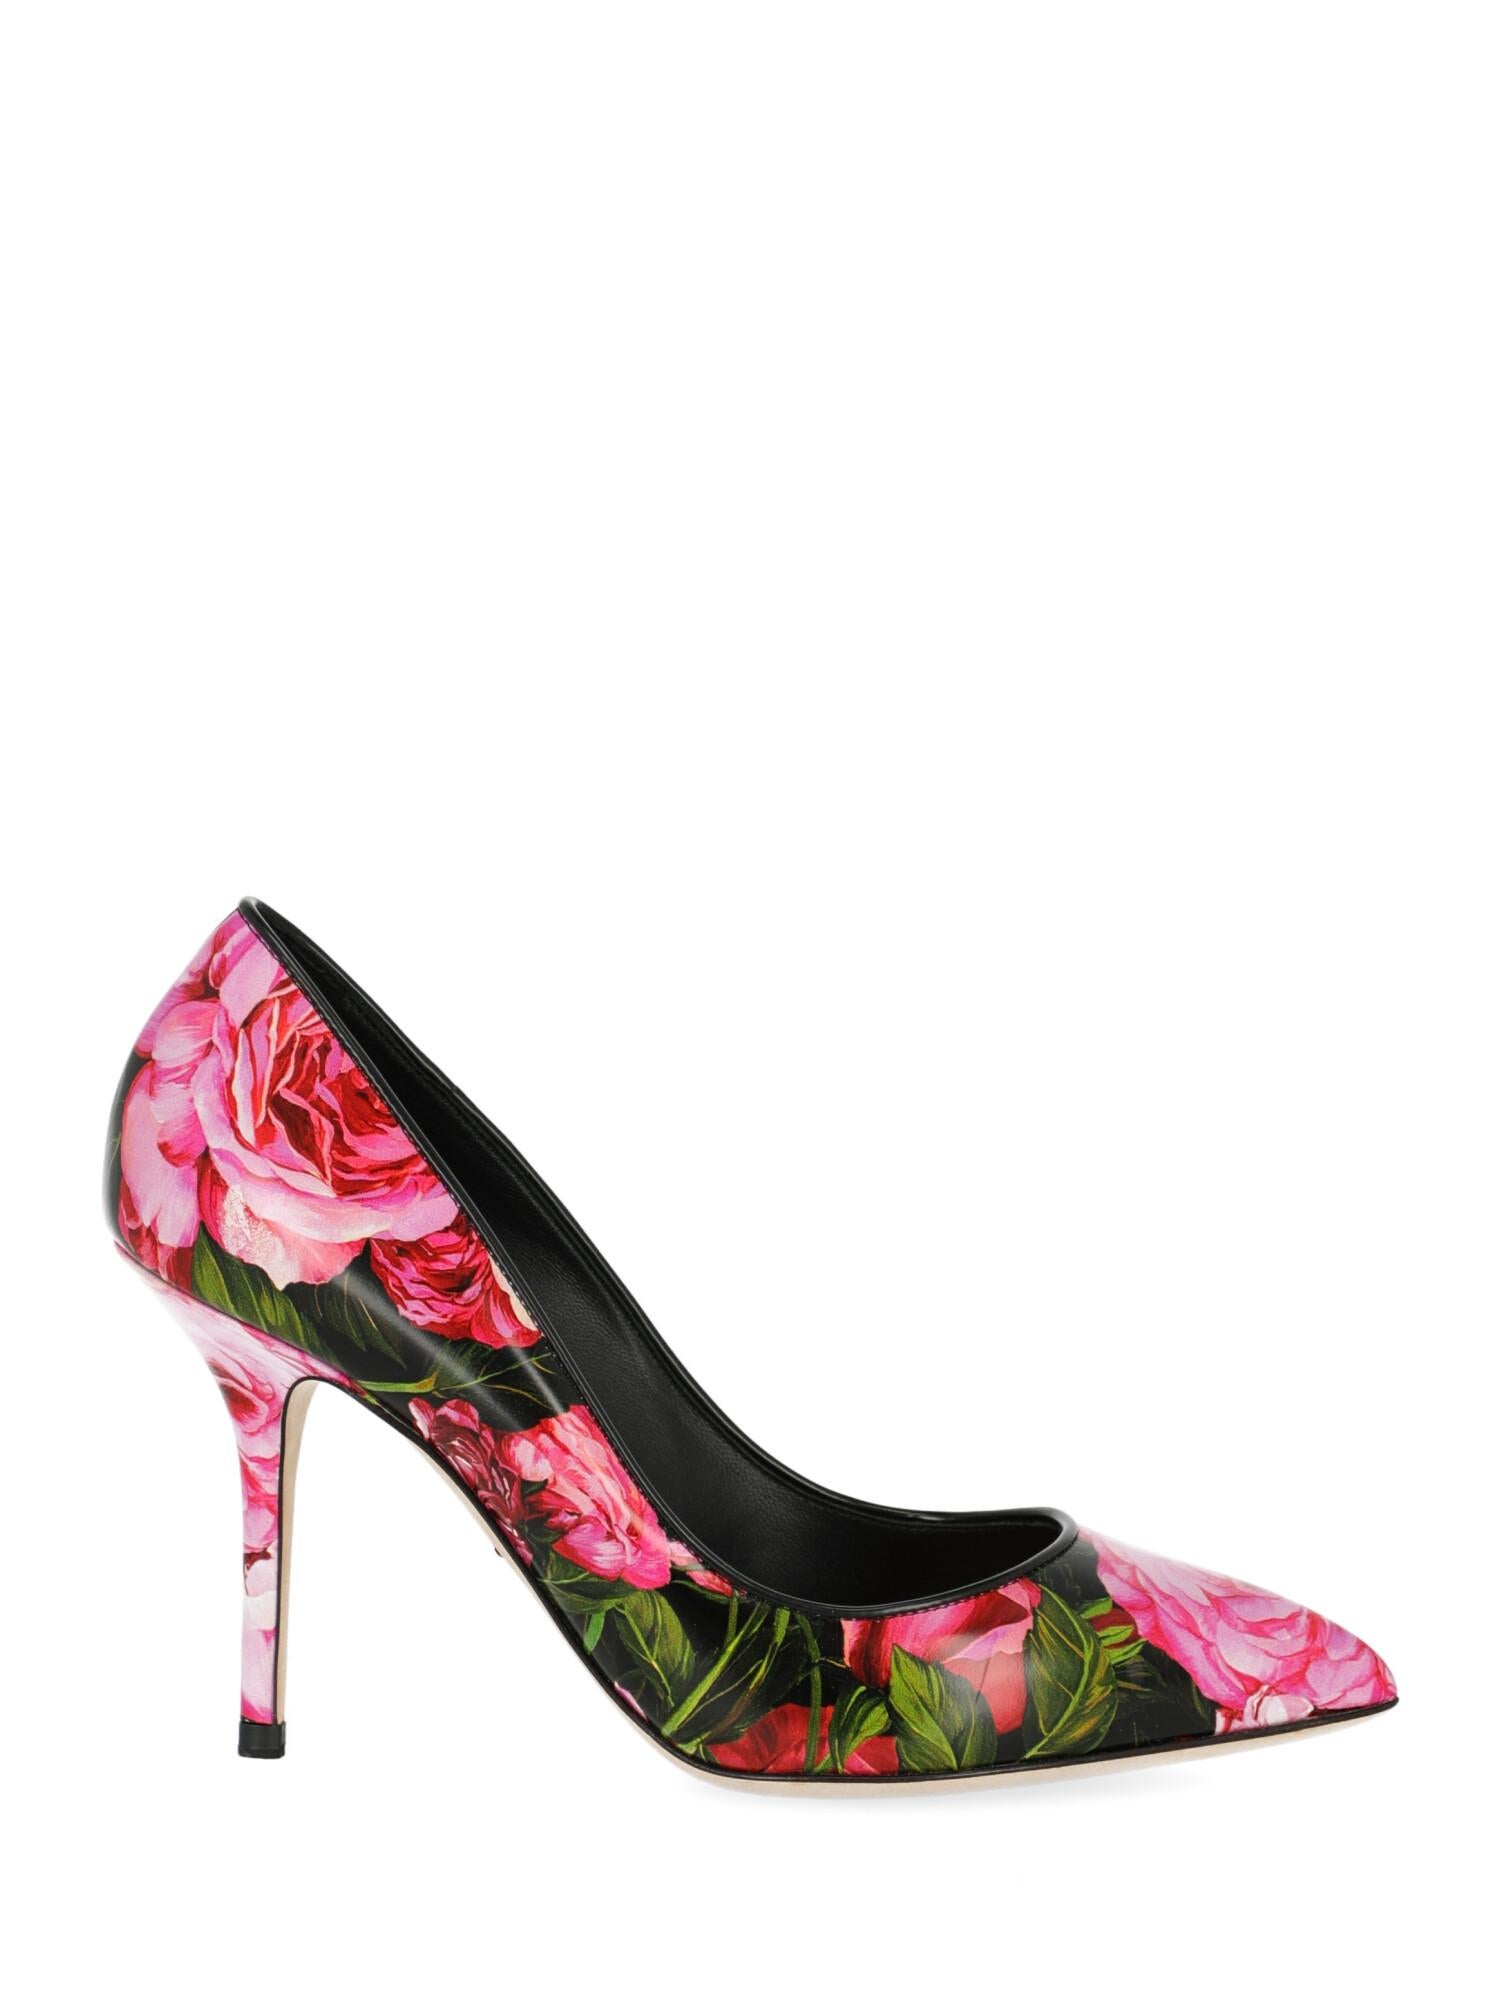 Shoe, leather, floral print, pointed toe, leather insole, tapered heel, mid heel.

Includes:
- Box
- Dust bag

Product Condition: New With Tag

Measurements:
Height: 8 cm

Composition:
Upper: 100% Calfskin
Sole: 100% Leather

Color: Black, 